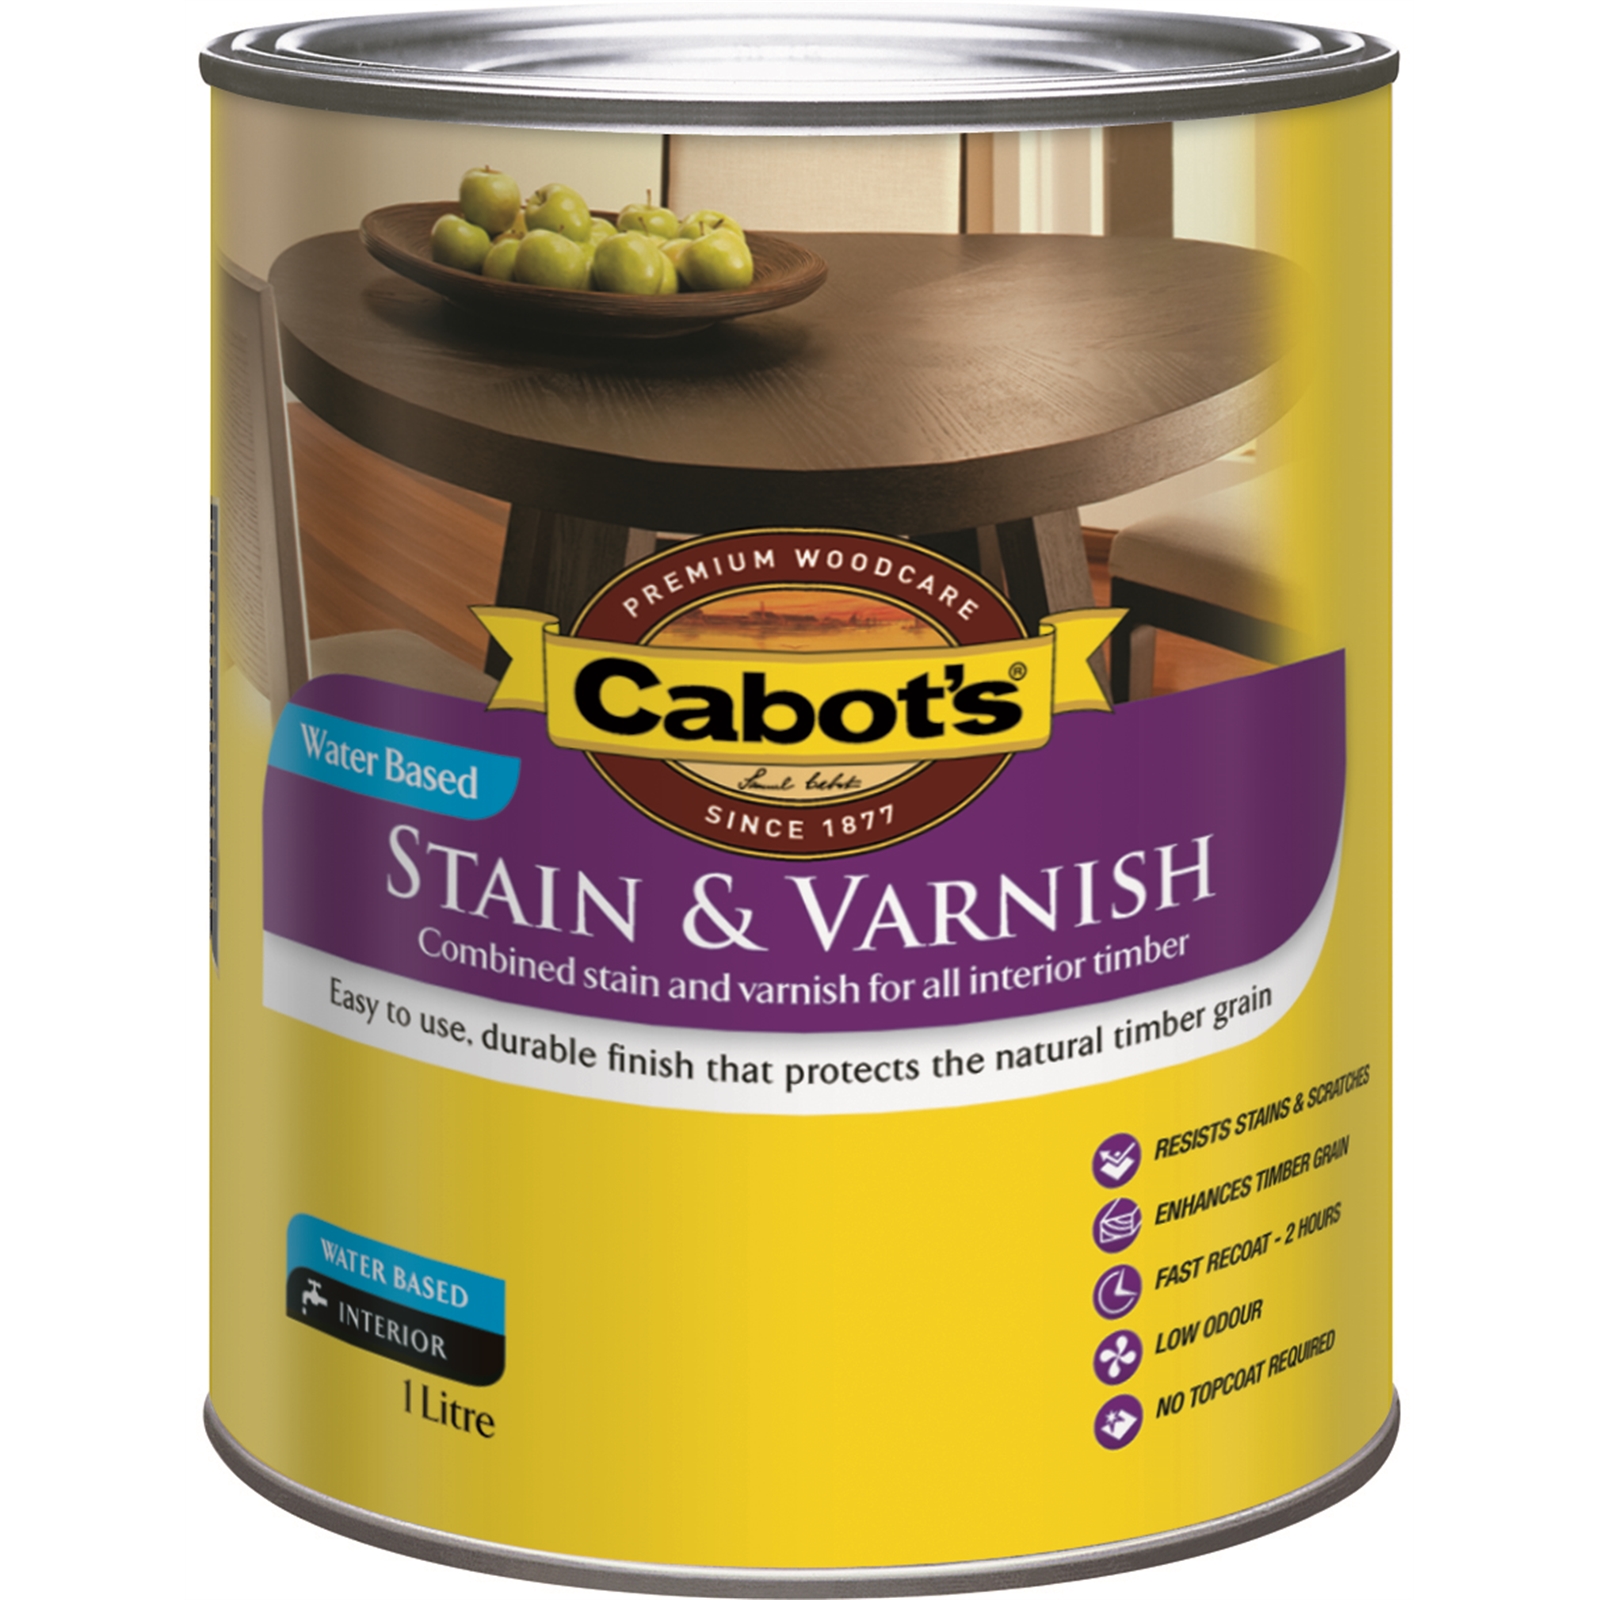 Cabot's 1L Gloss Cedar Water Based Stain and Varnish